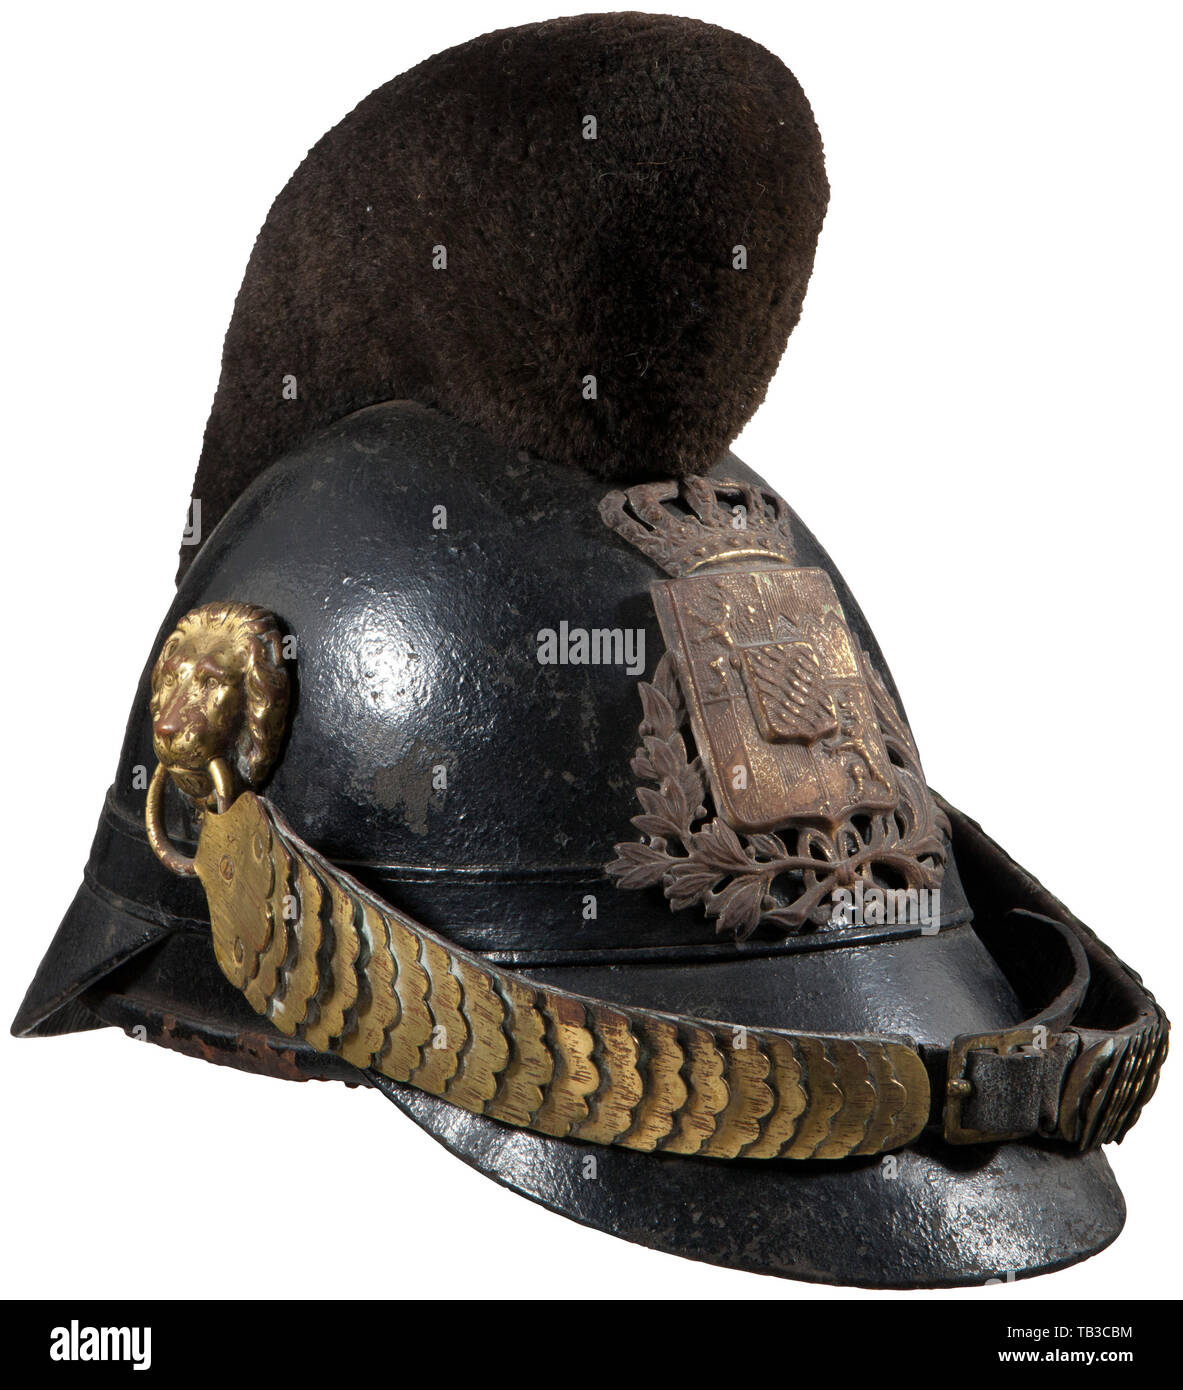 An Imperial German M 1868 Raupen helmet for enlisted men of the Bavarian cavalry, Black leather body with front and rear visor, black felt comb, gold Bavarian crowned crest front plate attached by four split brads (splintas), gold chinstraps with lion head side posts, black leather liner (tear and shows age), Bavarian state cockade (colours worn off), fine example of early model helmet. USA-lot. Bavaria, Bavarian, German, Germany, Southern Germany, the South of Germany, object, objects, stills, militaria, clipping, cut out, cut-out, cut-outs, his, Additional-Rights-Clearance-Info-Not-Available Stock Photo